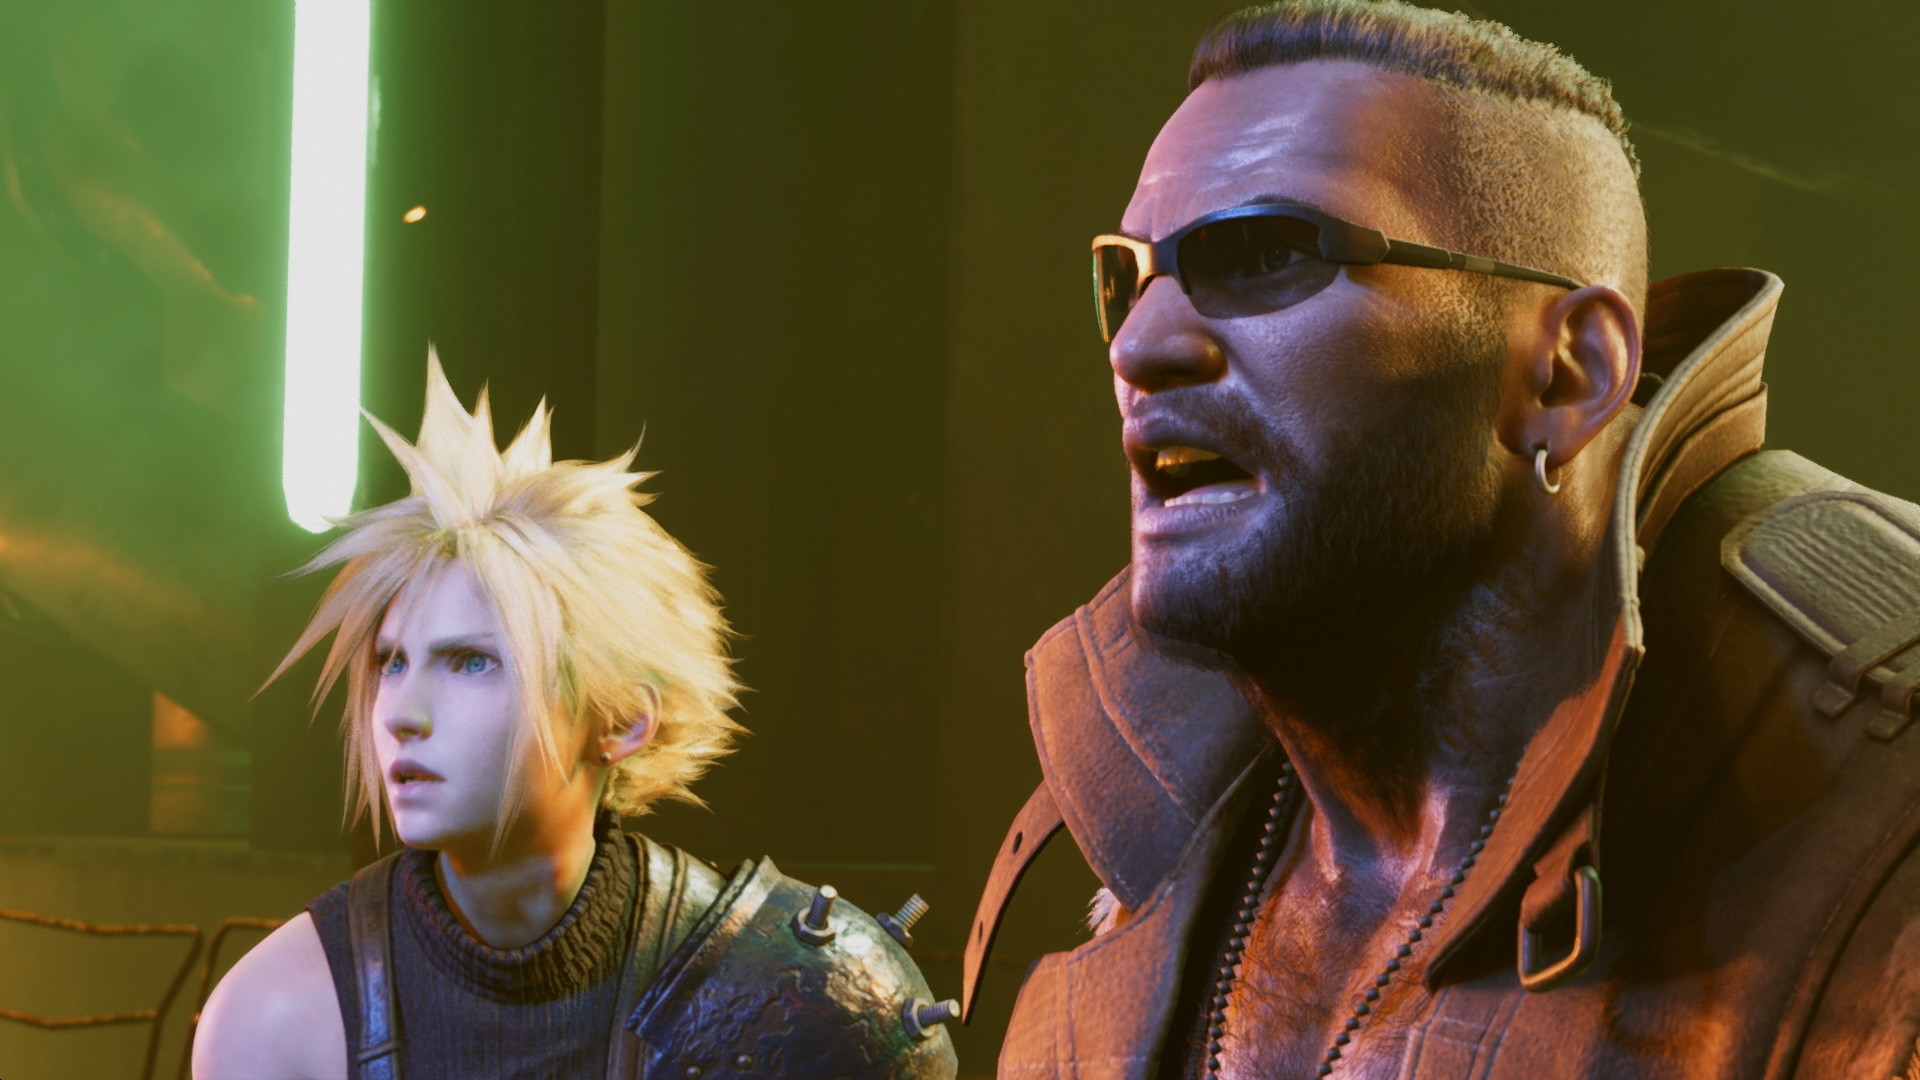 FINAL FANTASY VII REMAKE (PS4) cheap - Price of $12.99